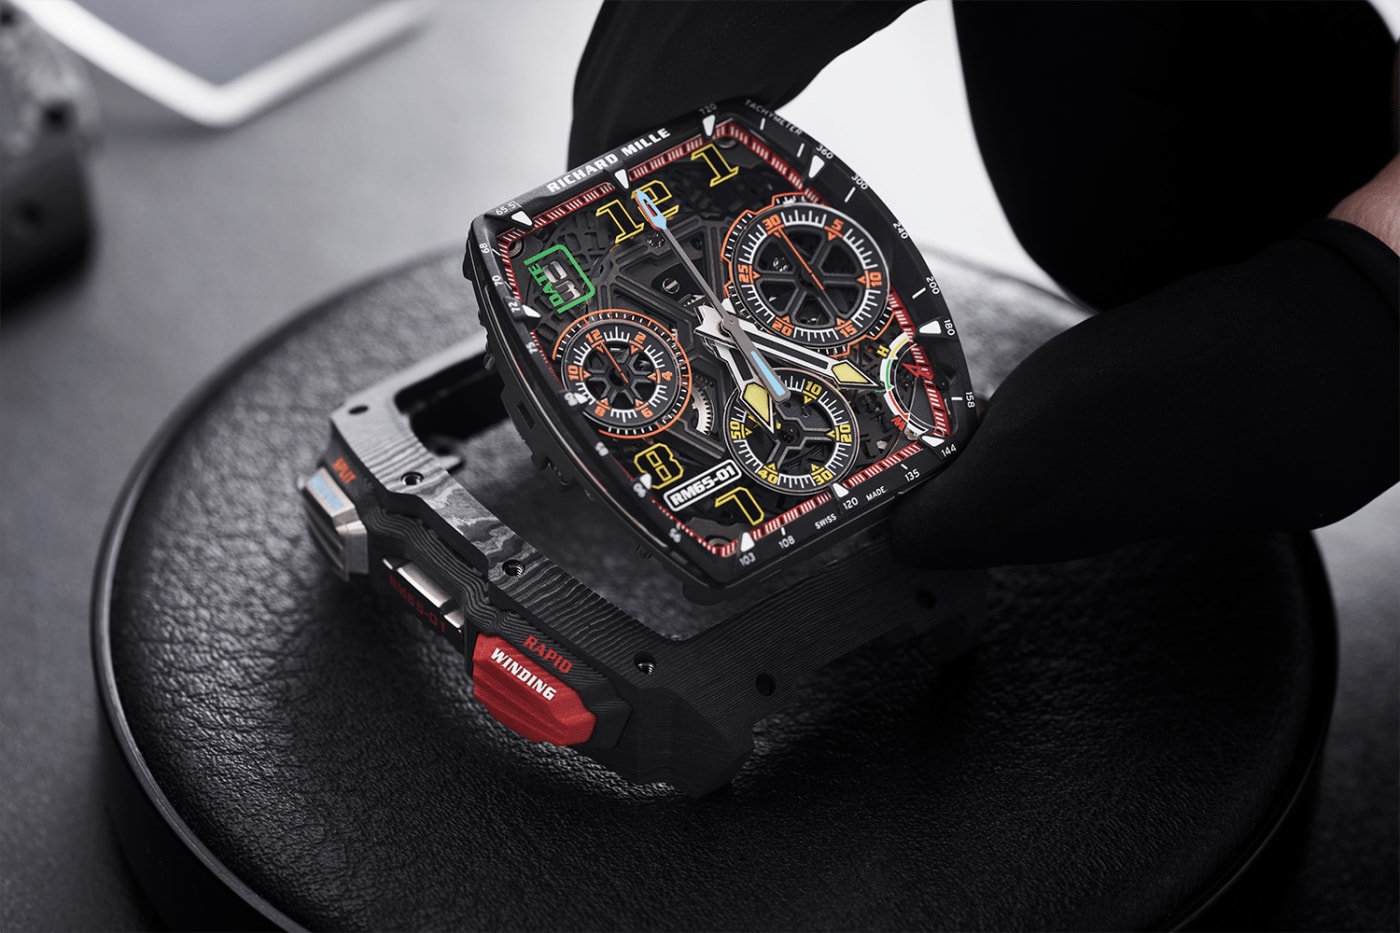 Morgan Stanley Report Ranks 22 Year Old Richard Mille as 7th Biggest Watchmaker